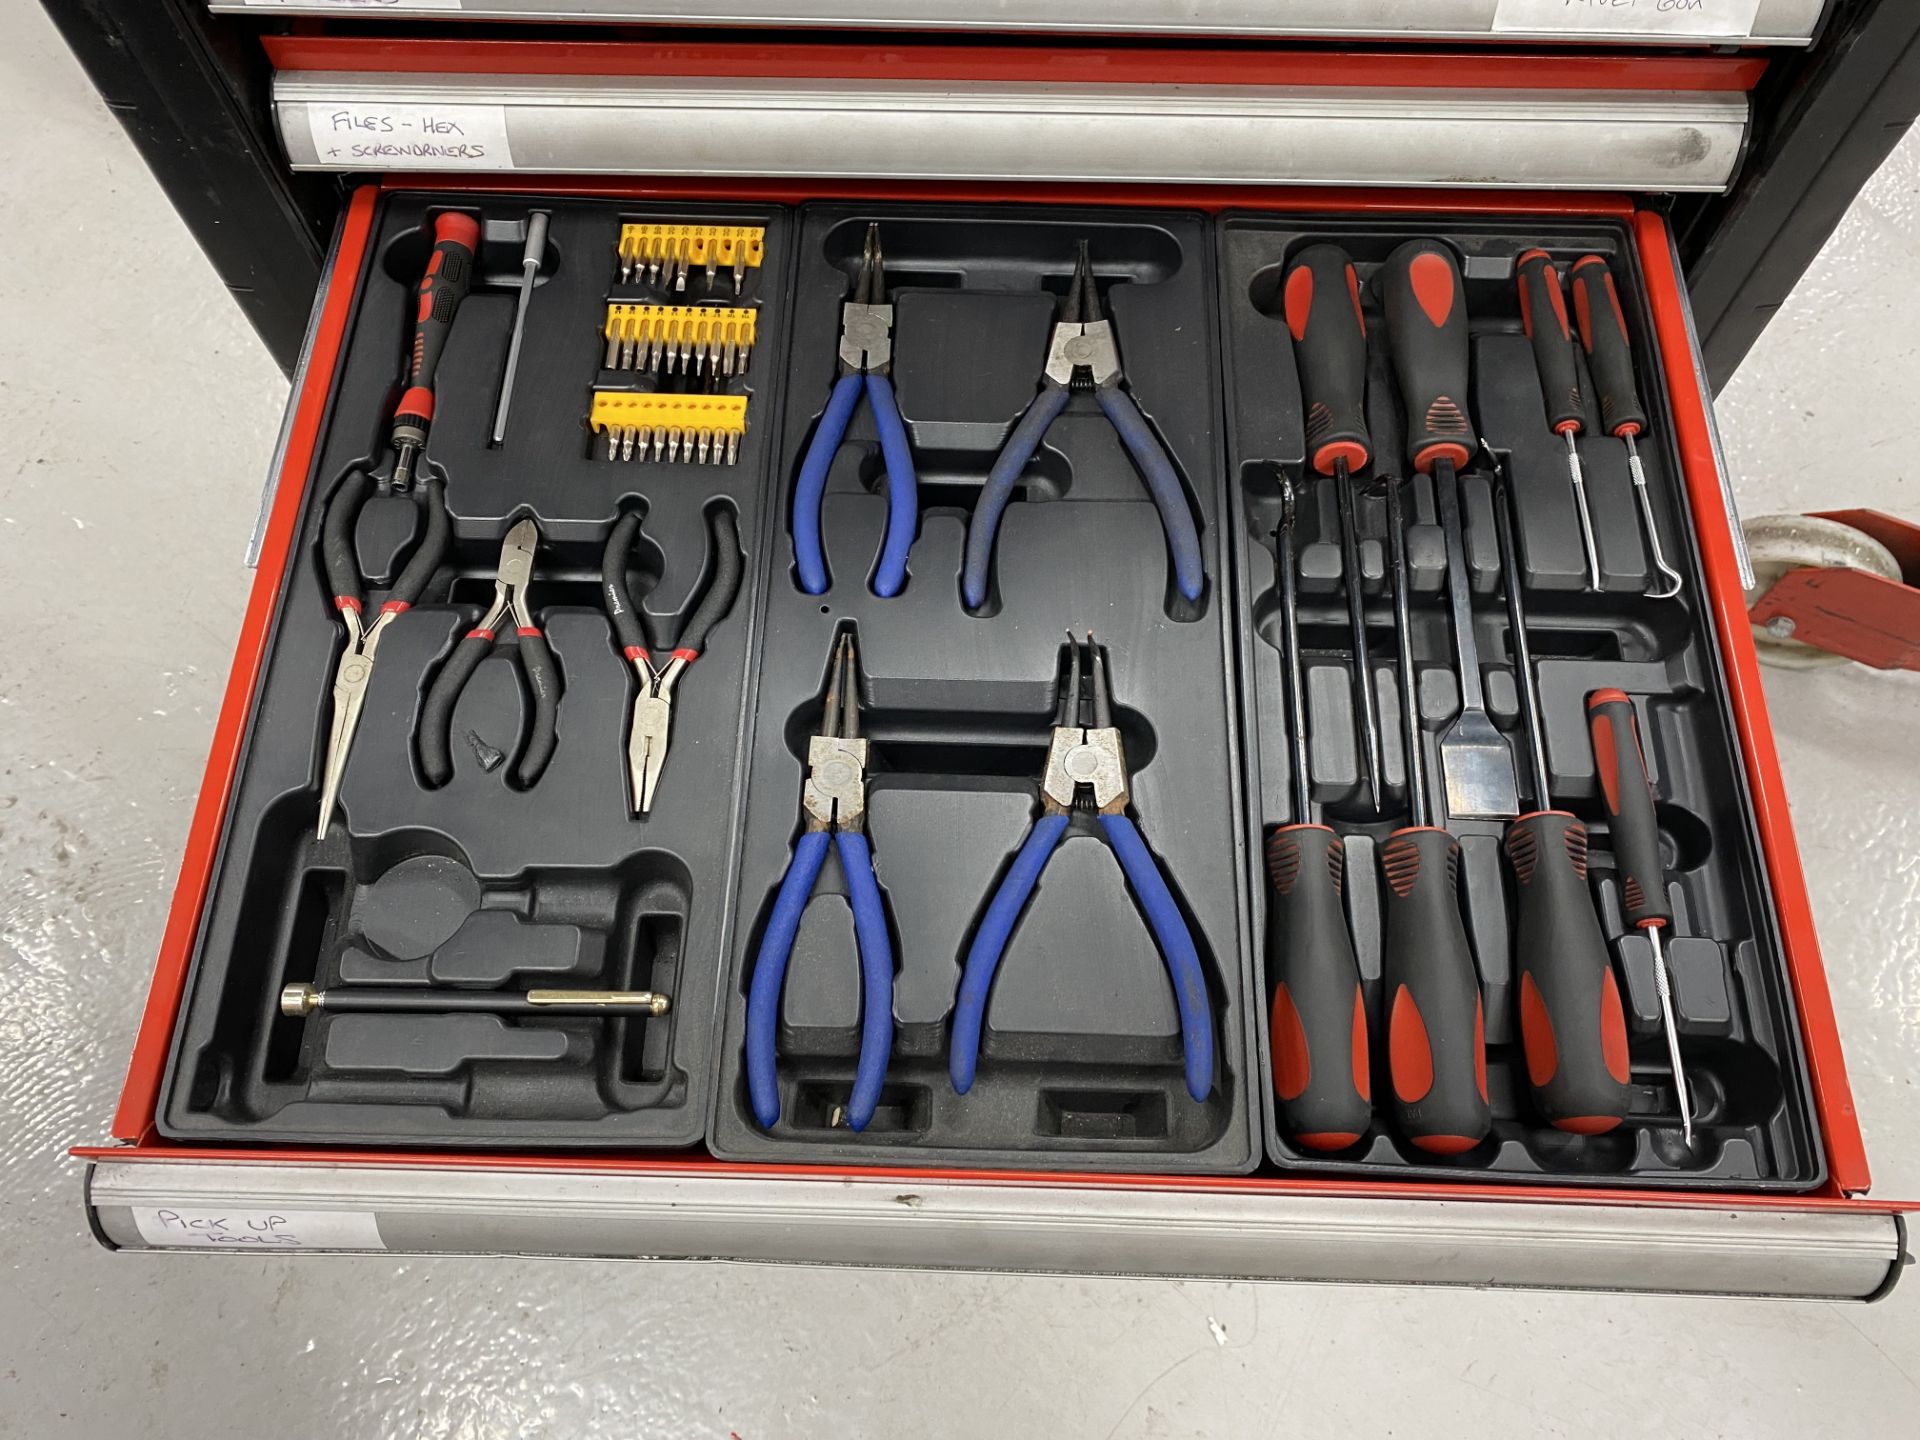 Sealey 10 drawer mobile toolbox including the following tools, rings and open ended spanners 7mm- - Image 6 of 11